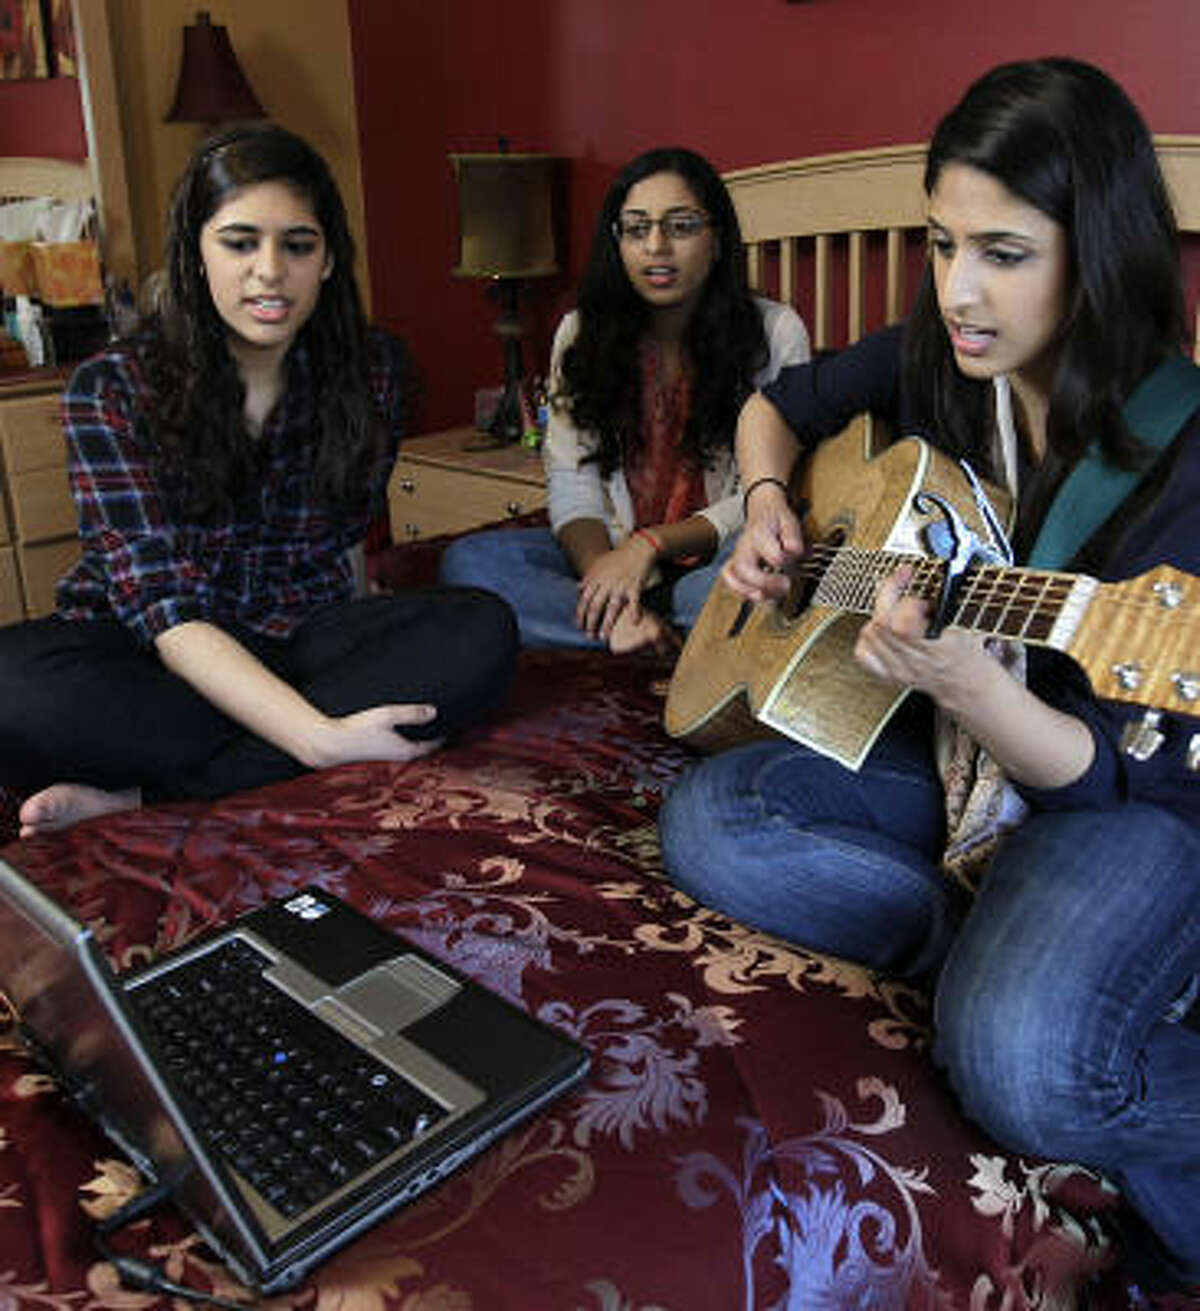 Asma Mirza plays guitar and sings with her sisters Ayesha, 16, left, and Hira, 18, at her Houston-area home. Born in Pakistan, Mirza has lived in the United States for 19 of her 20 years and is a naturalized American citizen.